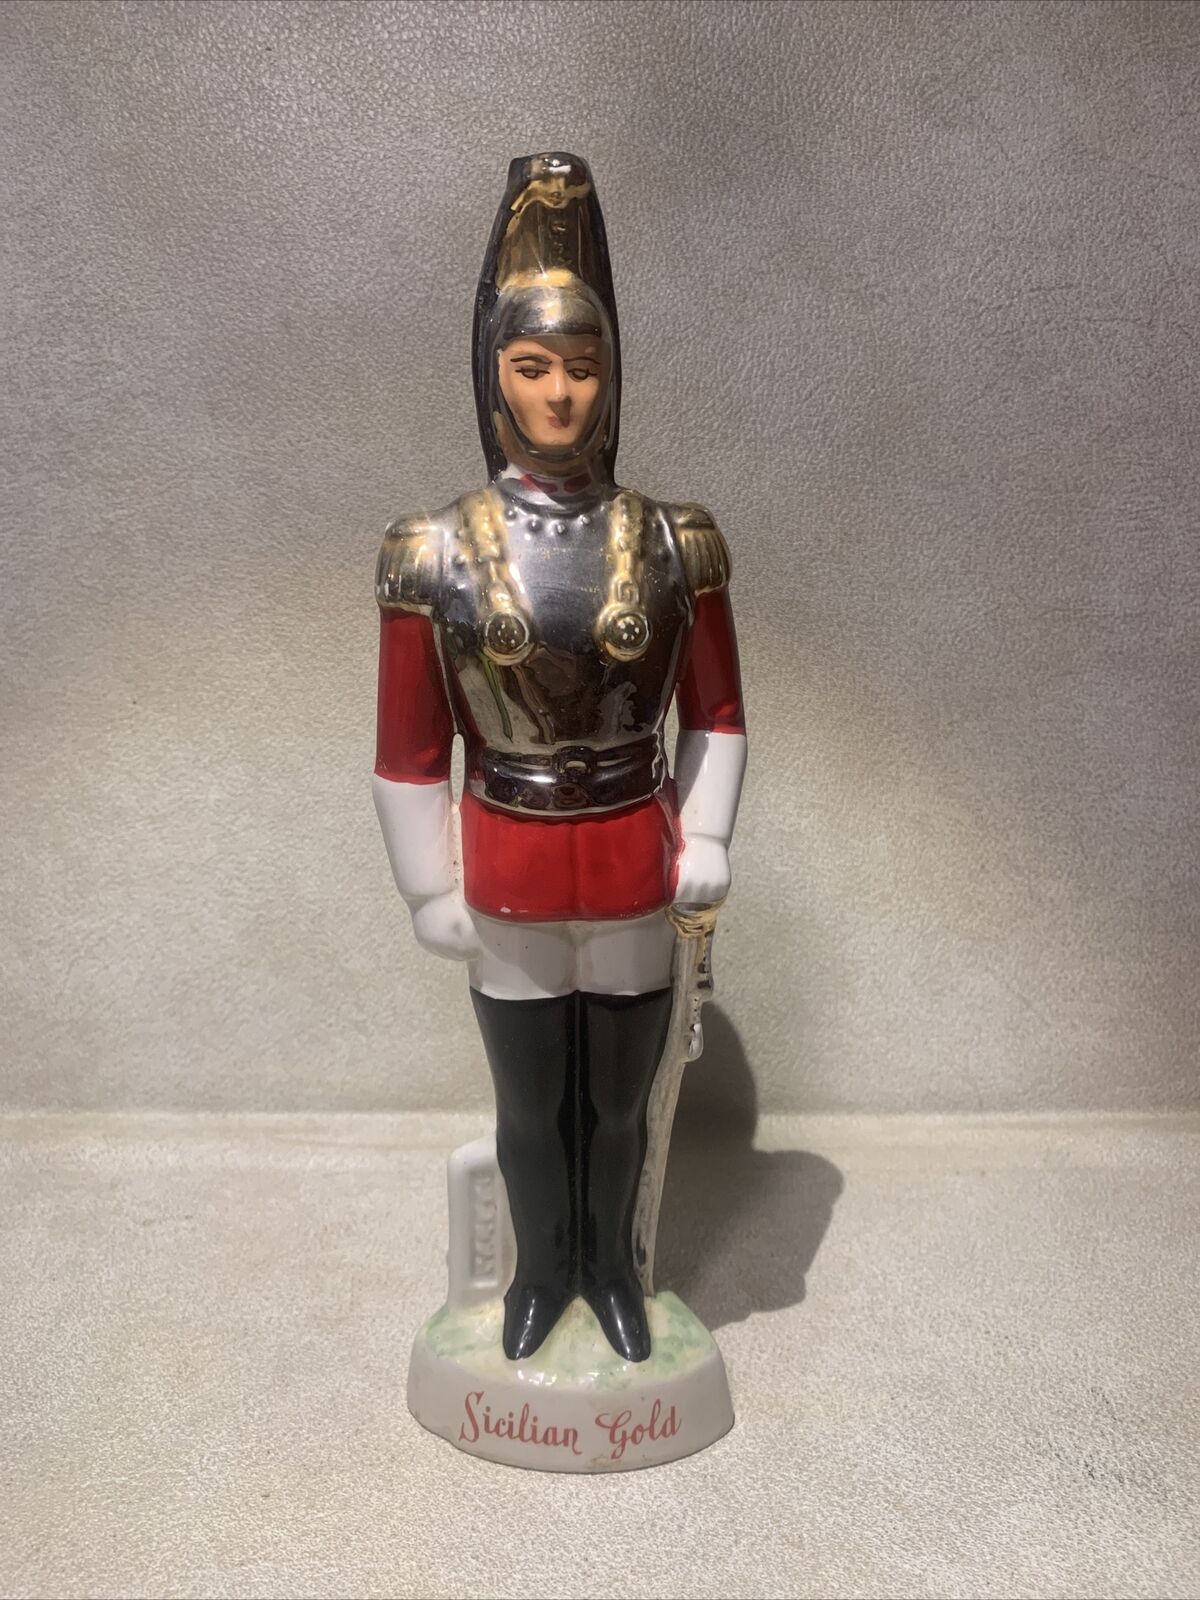 Vntage Sicilian Gold BOTTLE Italian Royal Guard Soldier Italy Empty 12” Decanter